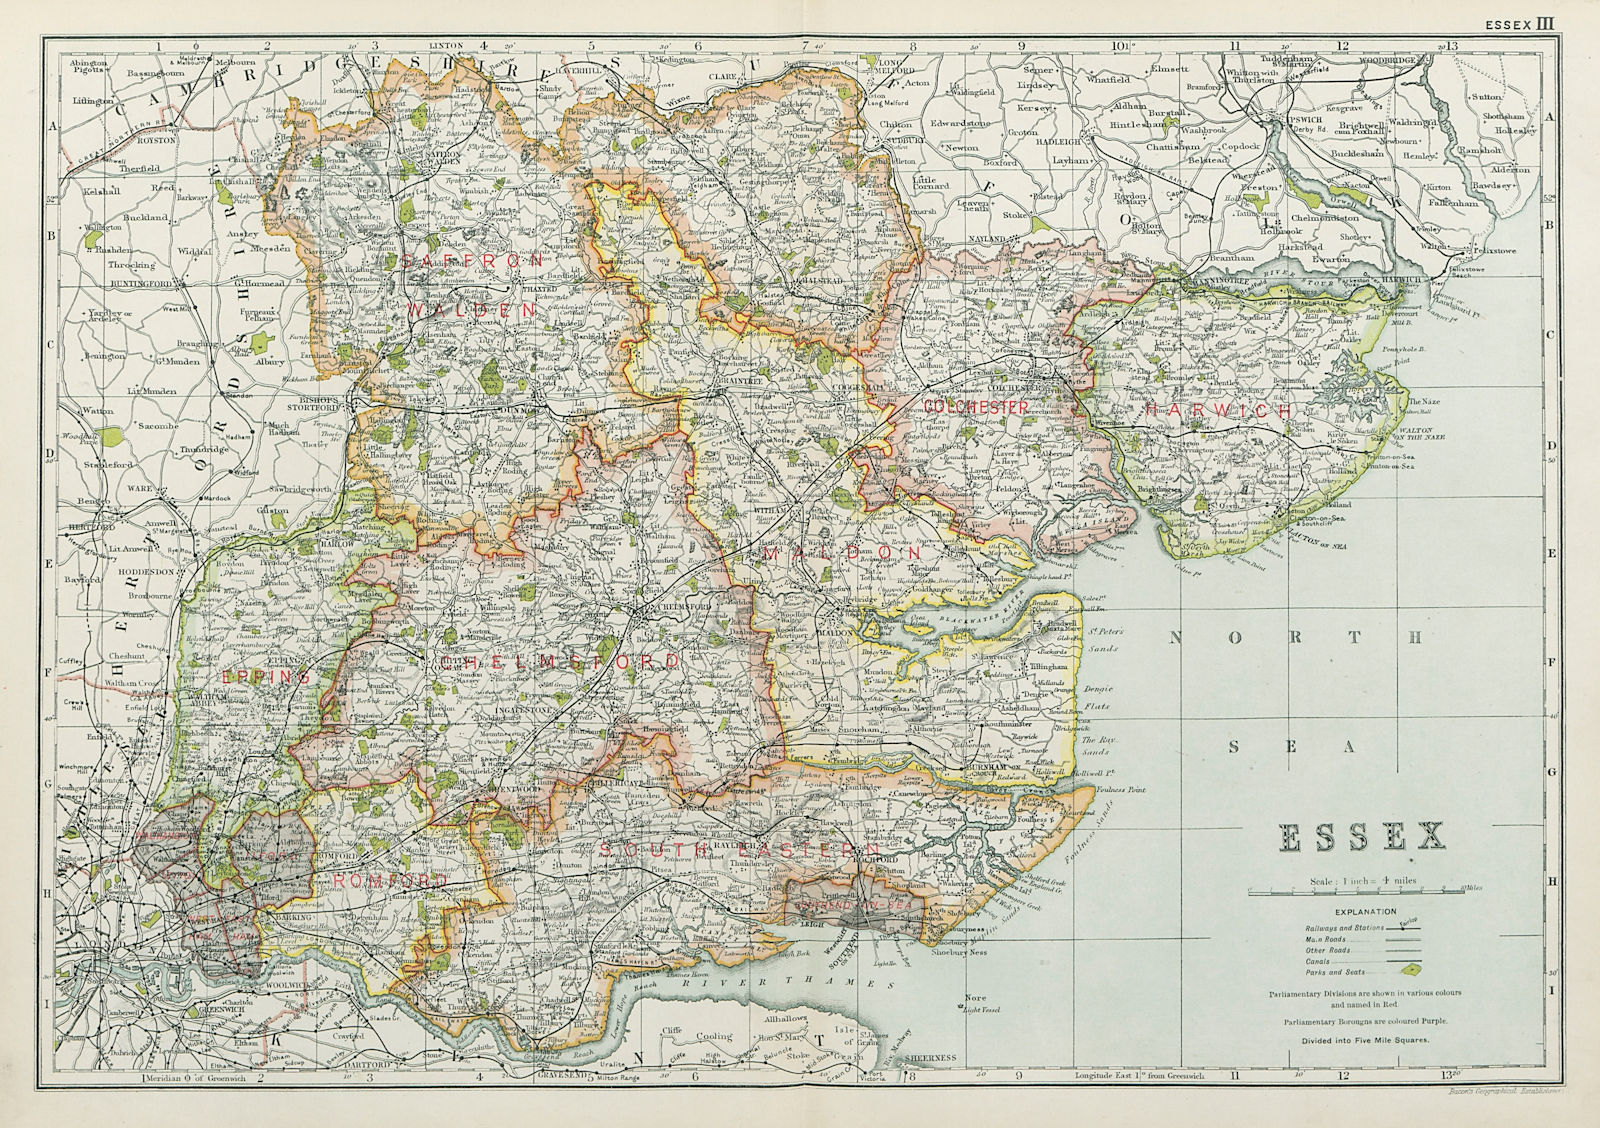 Associate Product ESSEX. Showing Parliamentary divisions, boroughs & parks. BACON 1920 old map